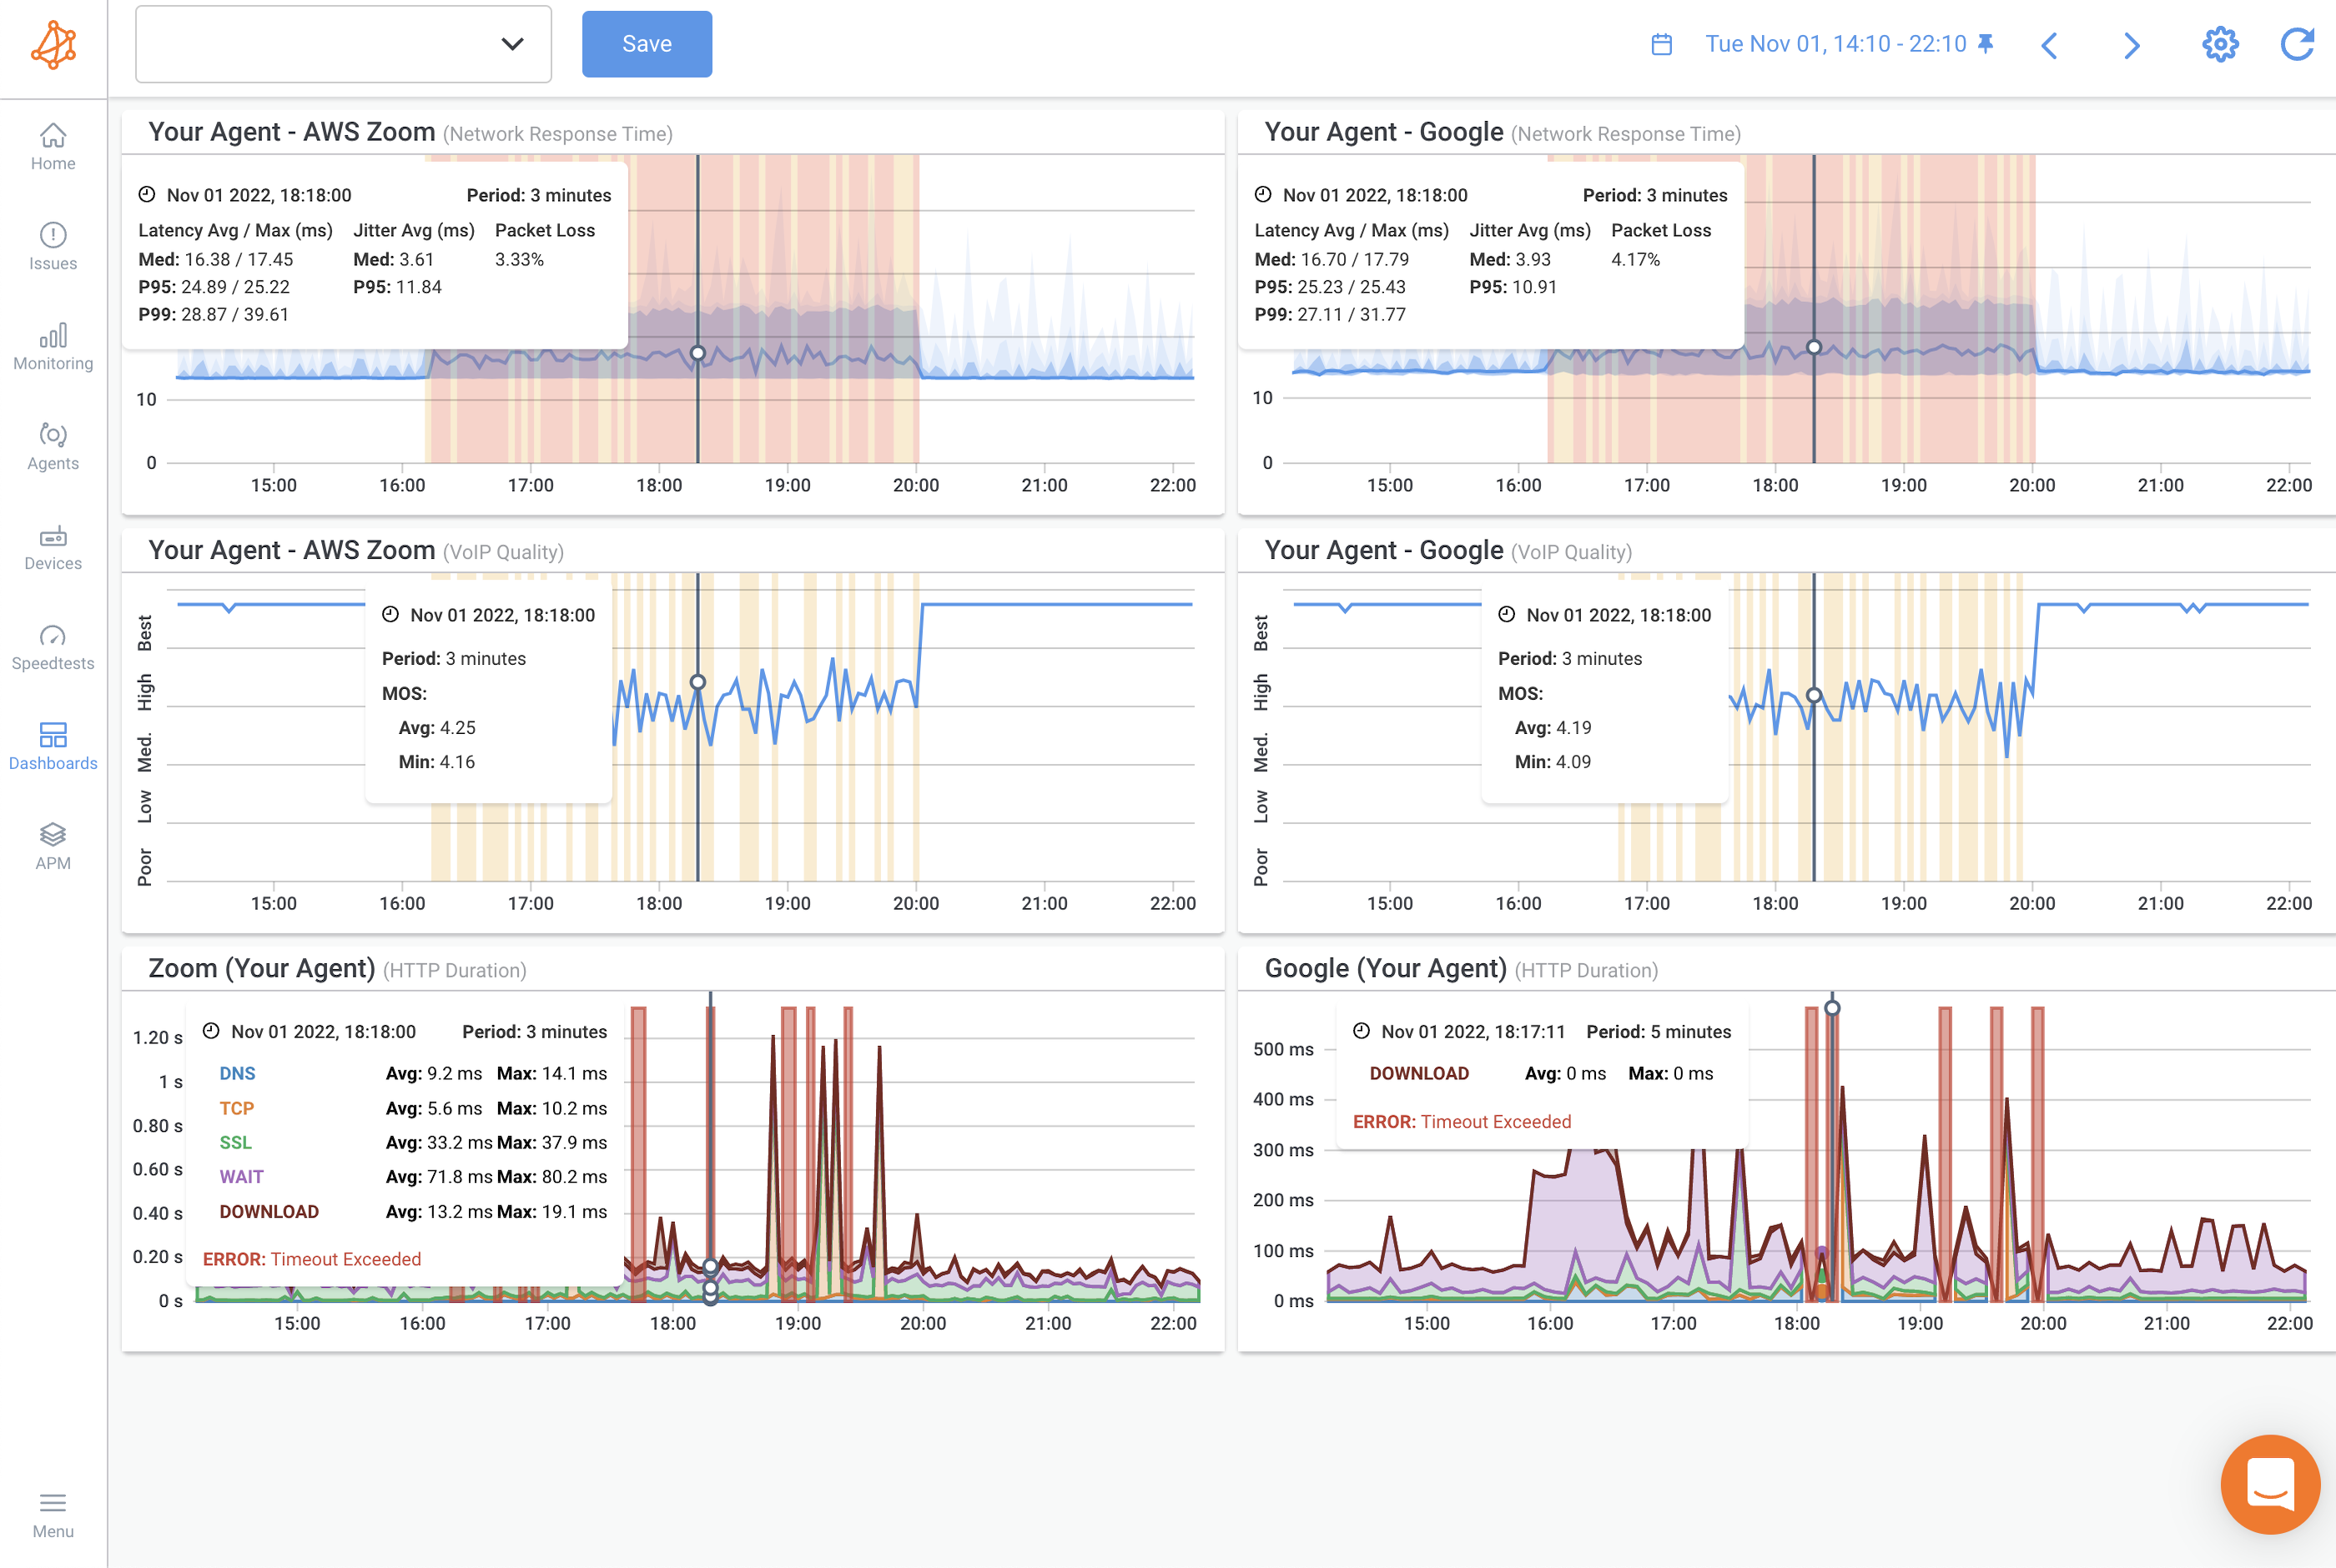 Zoom Troubleshooting Dashboard Sessions With Issue With Tool Tip Original